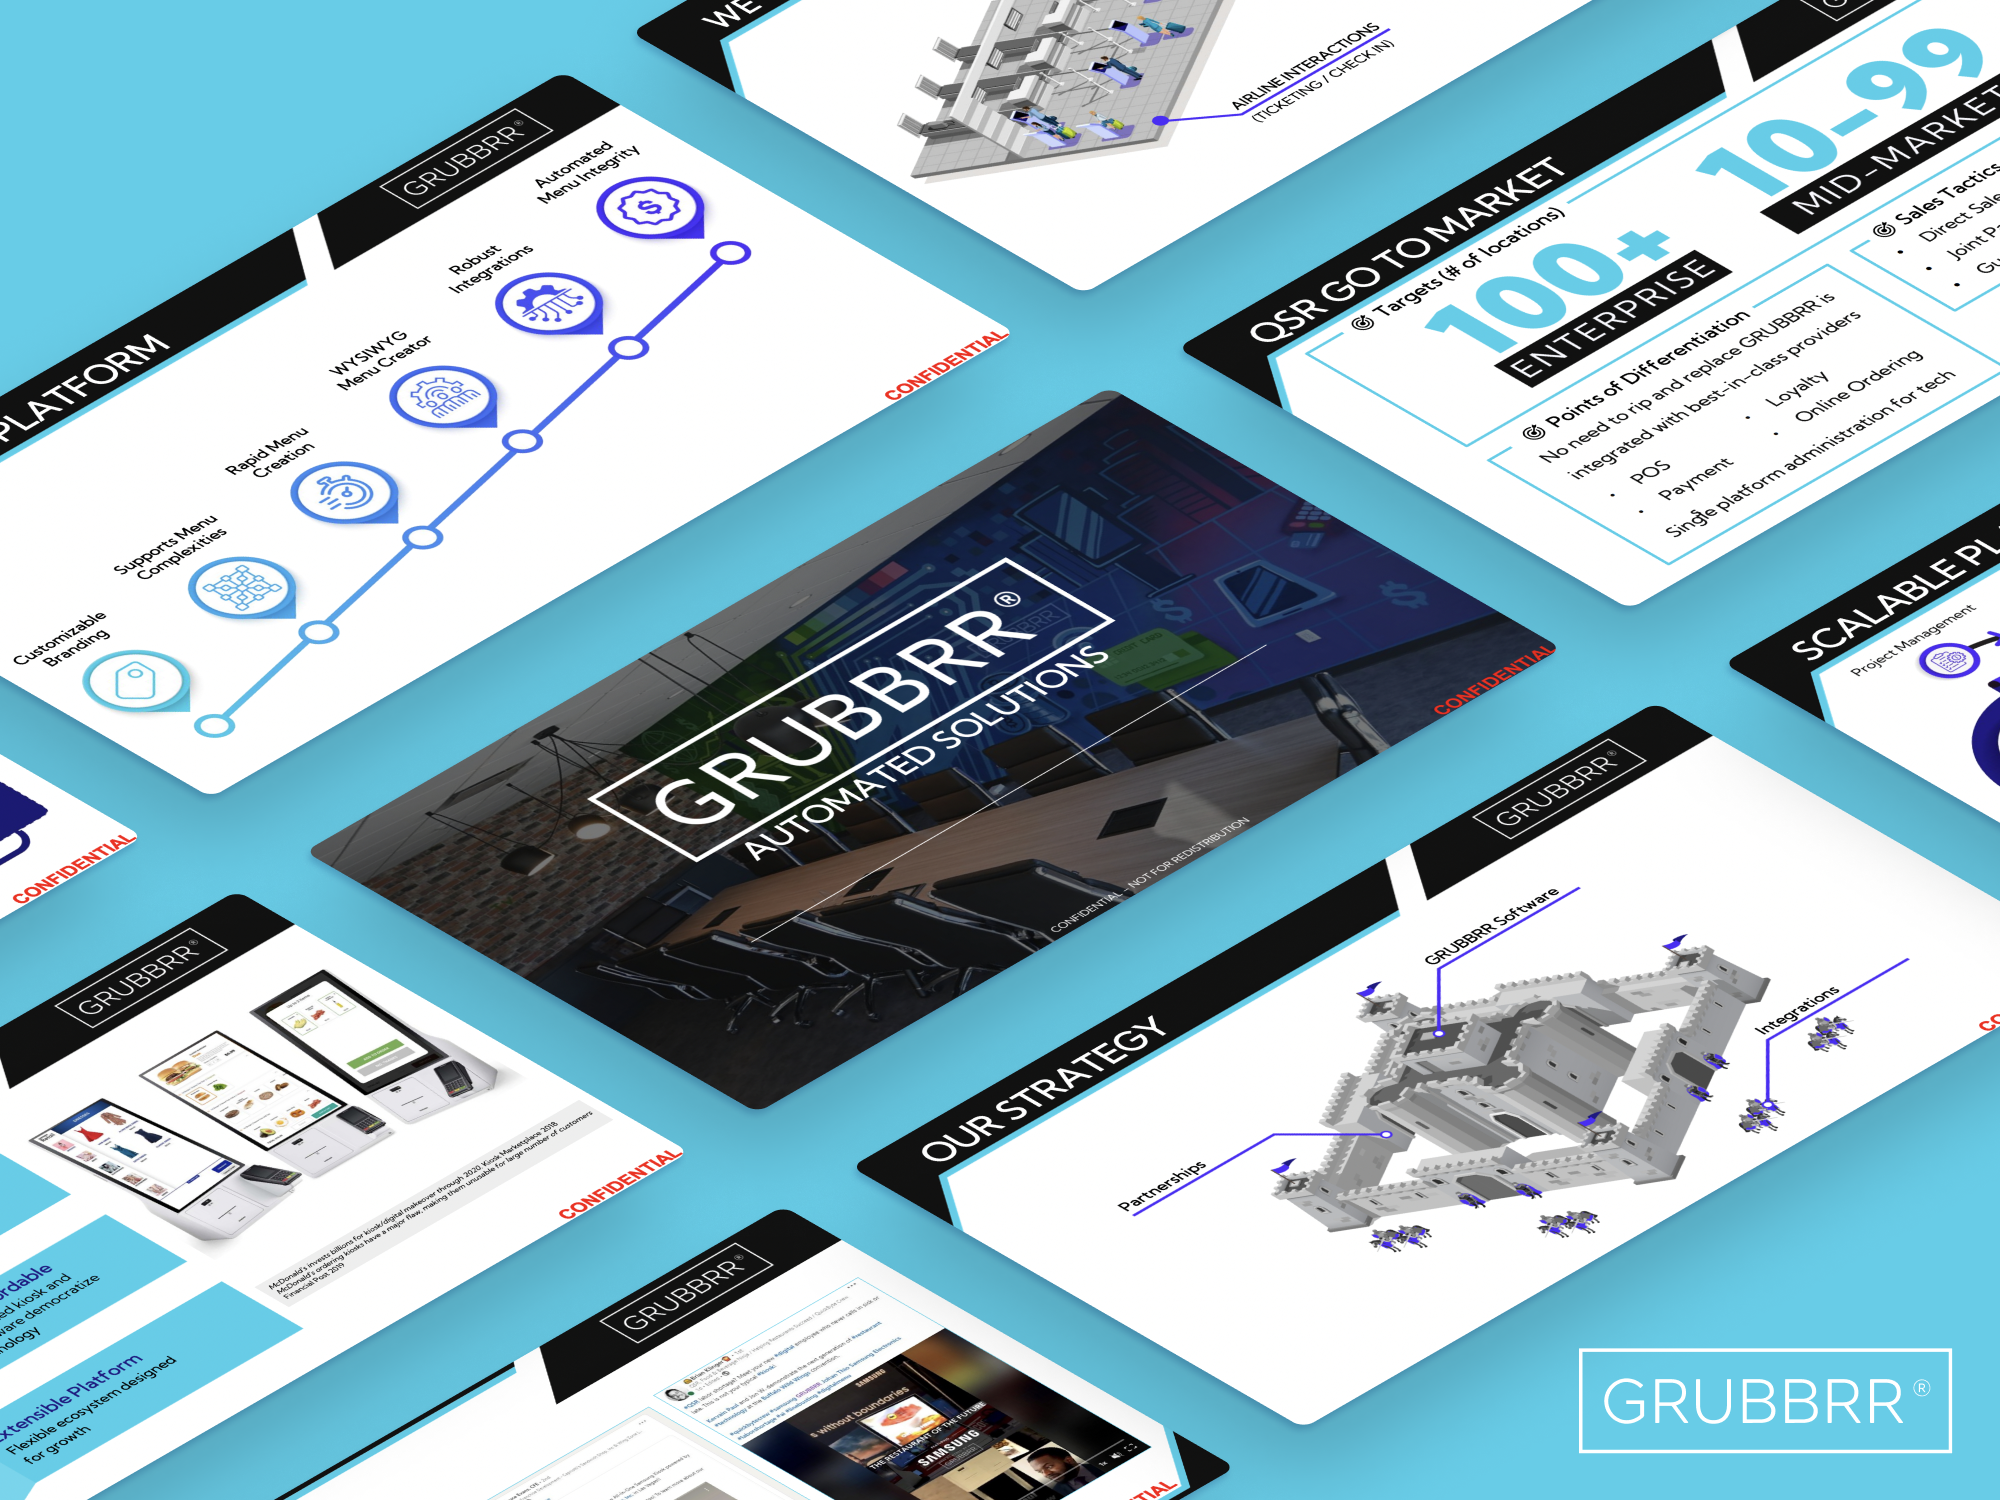 GRUBBRR raised $35M for self-ordering tech with this pitch deck